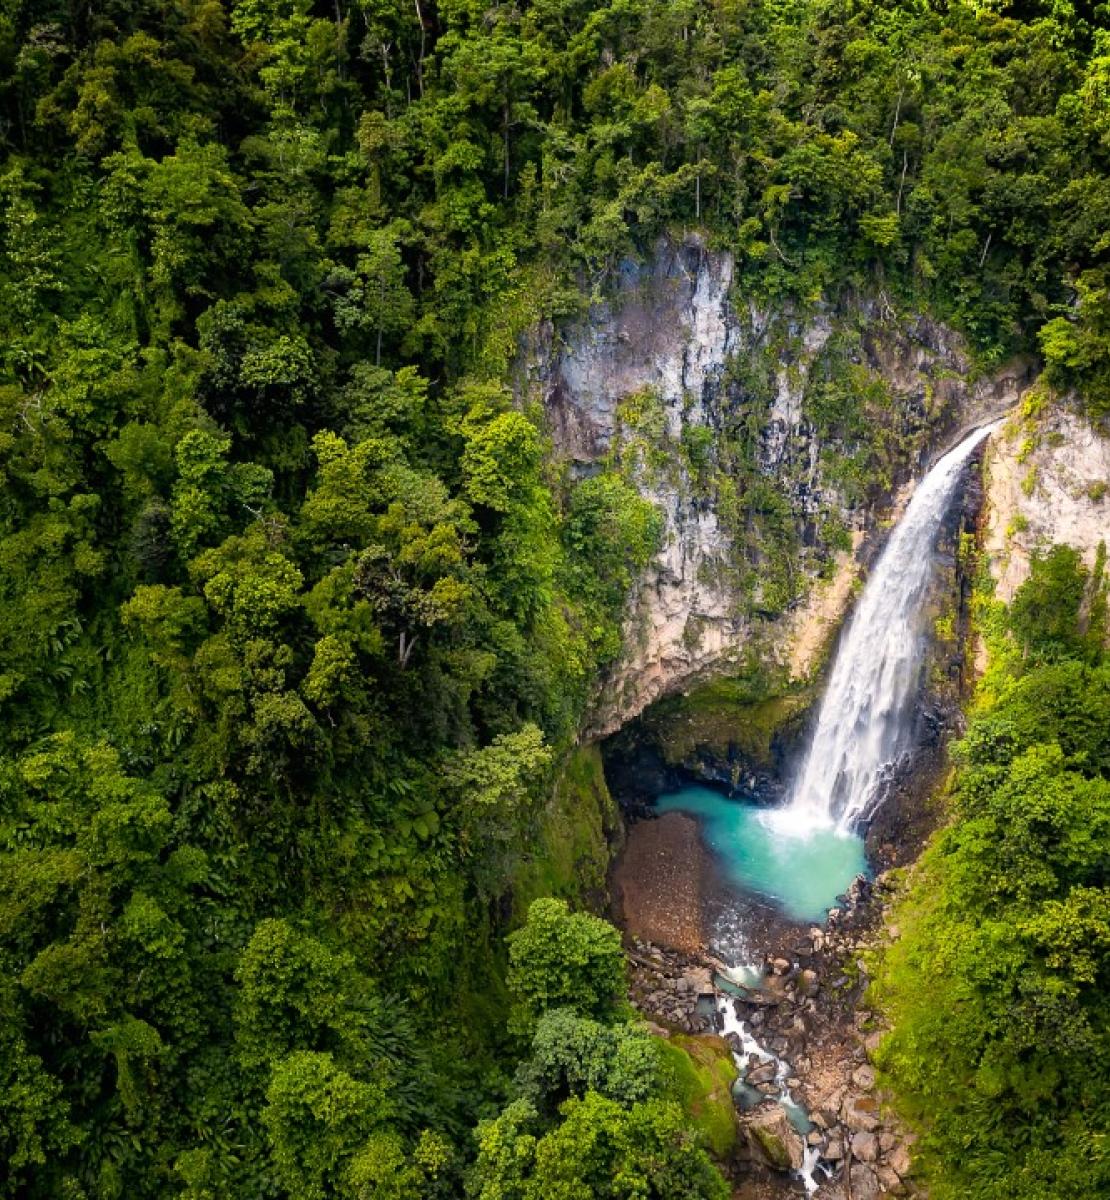 One of the great waterfalls in Dominica.